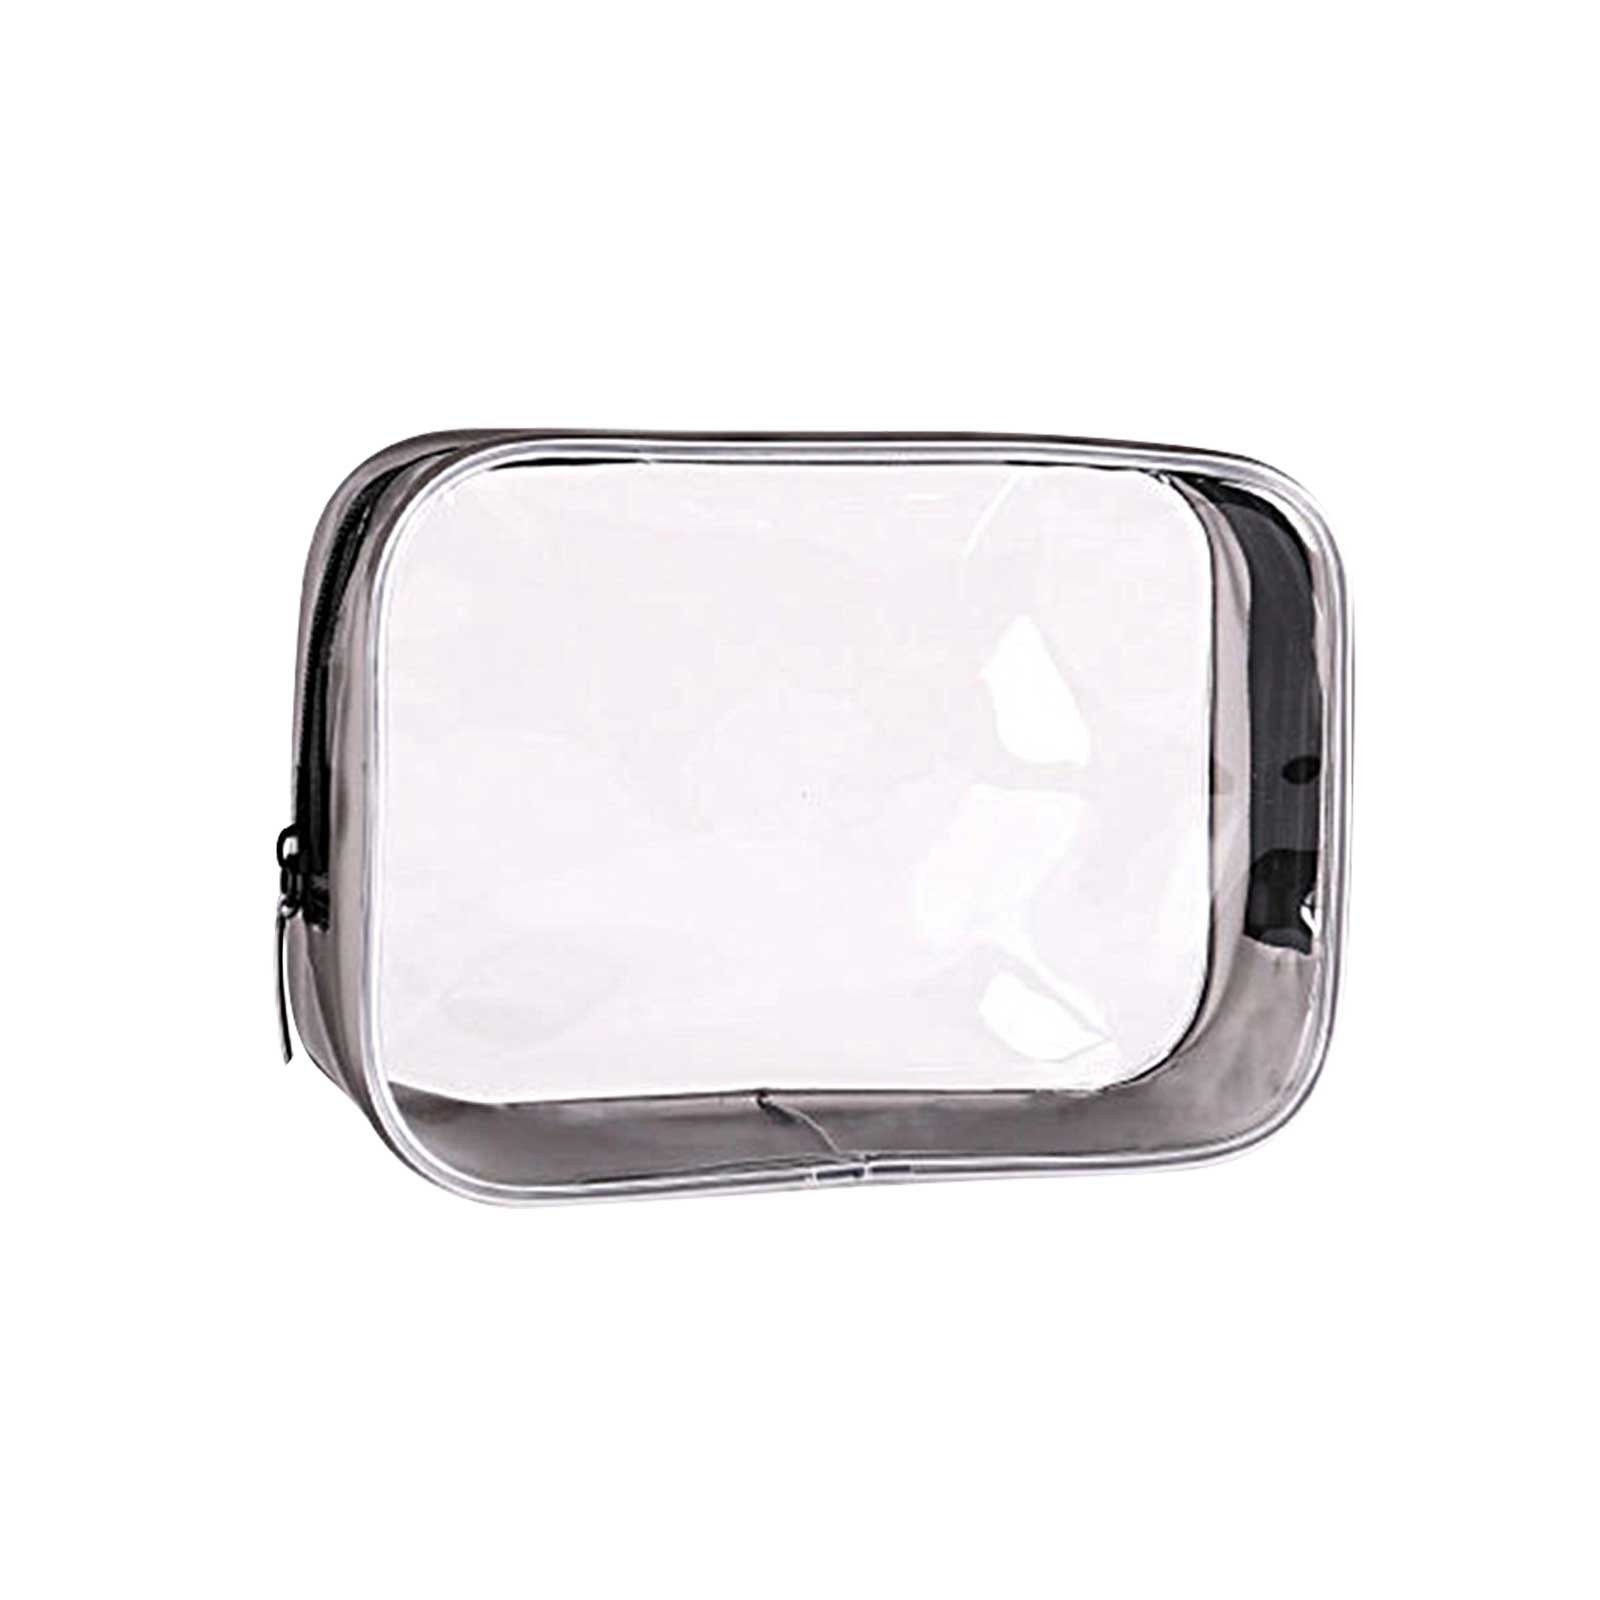 WNG Clear Makeup Bag Organizer Cosmetic Bag Make Up Bag Travel Toiletry Bag  for Women Small Makeup Bags for Women Travel Makeup Bag Makeup Pouch